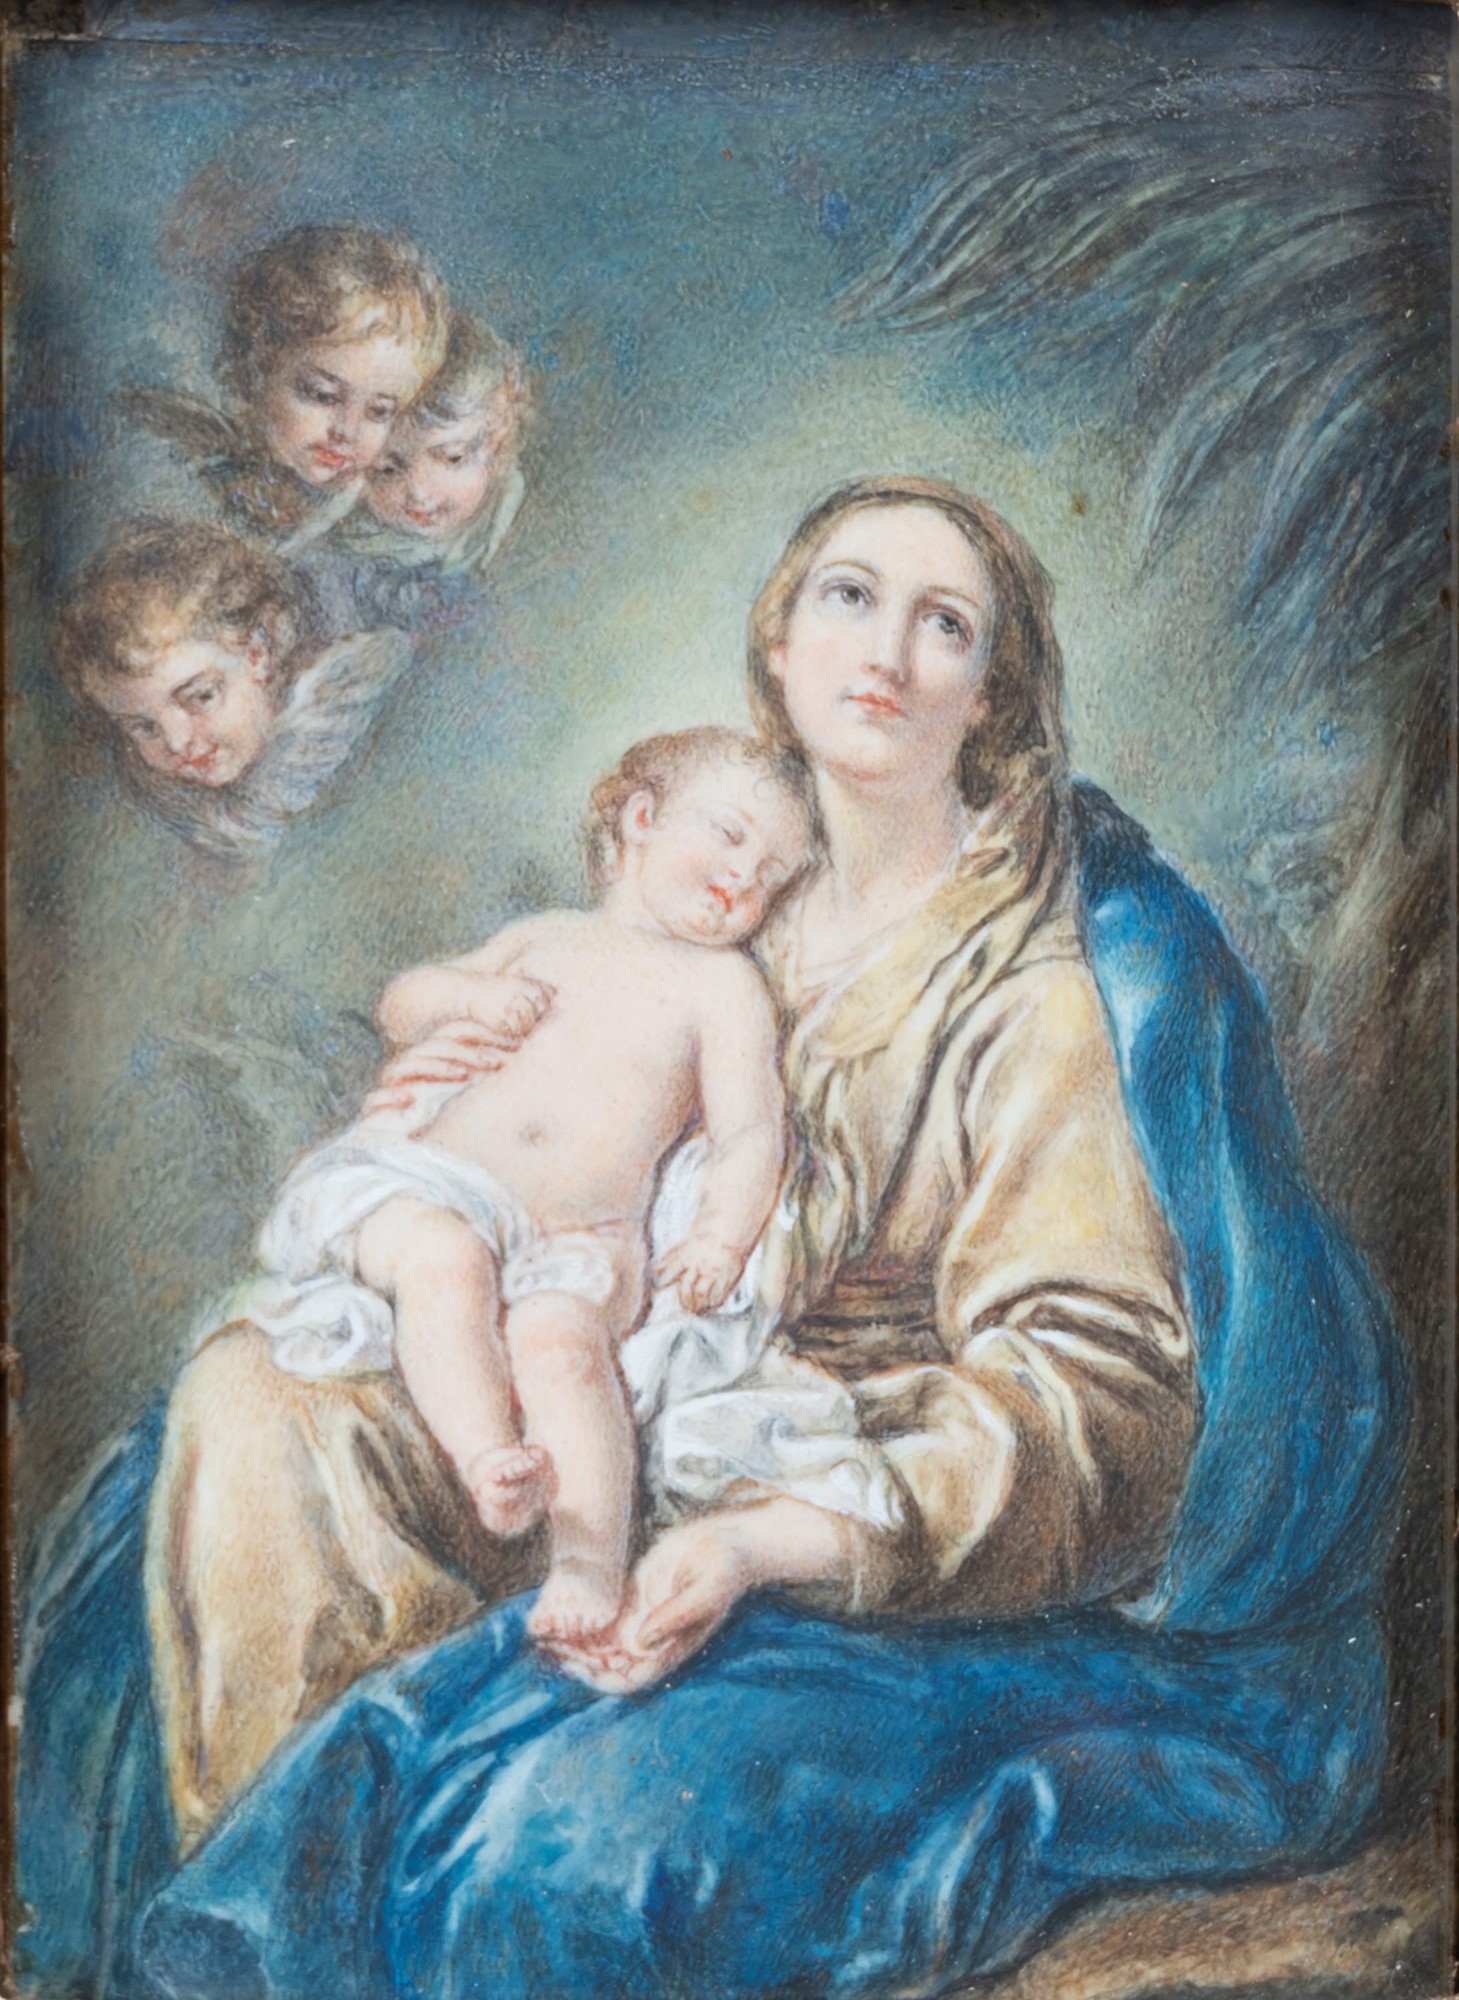 Italian School, XIX Century - Madonna with Child and angels - Image 2 of 3